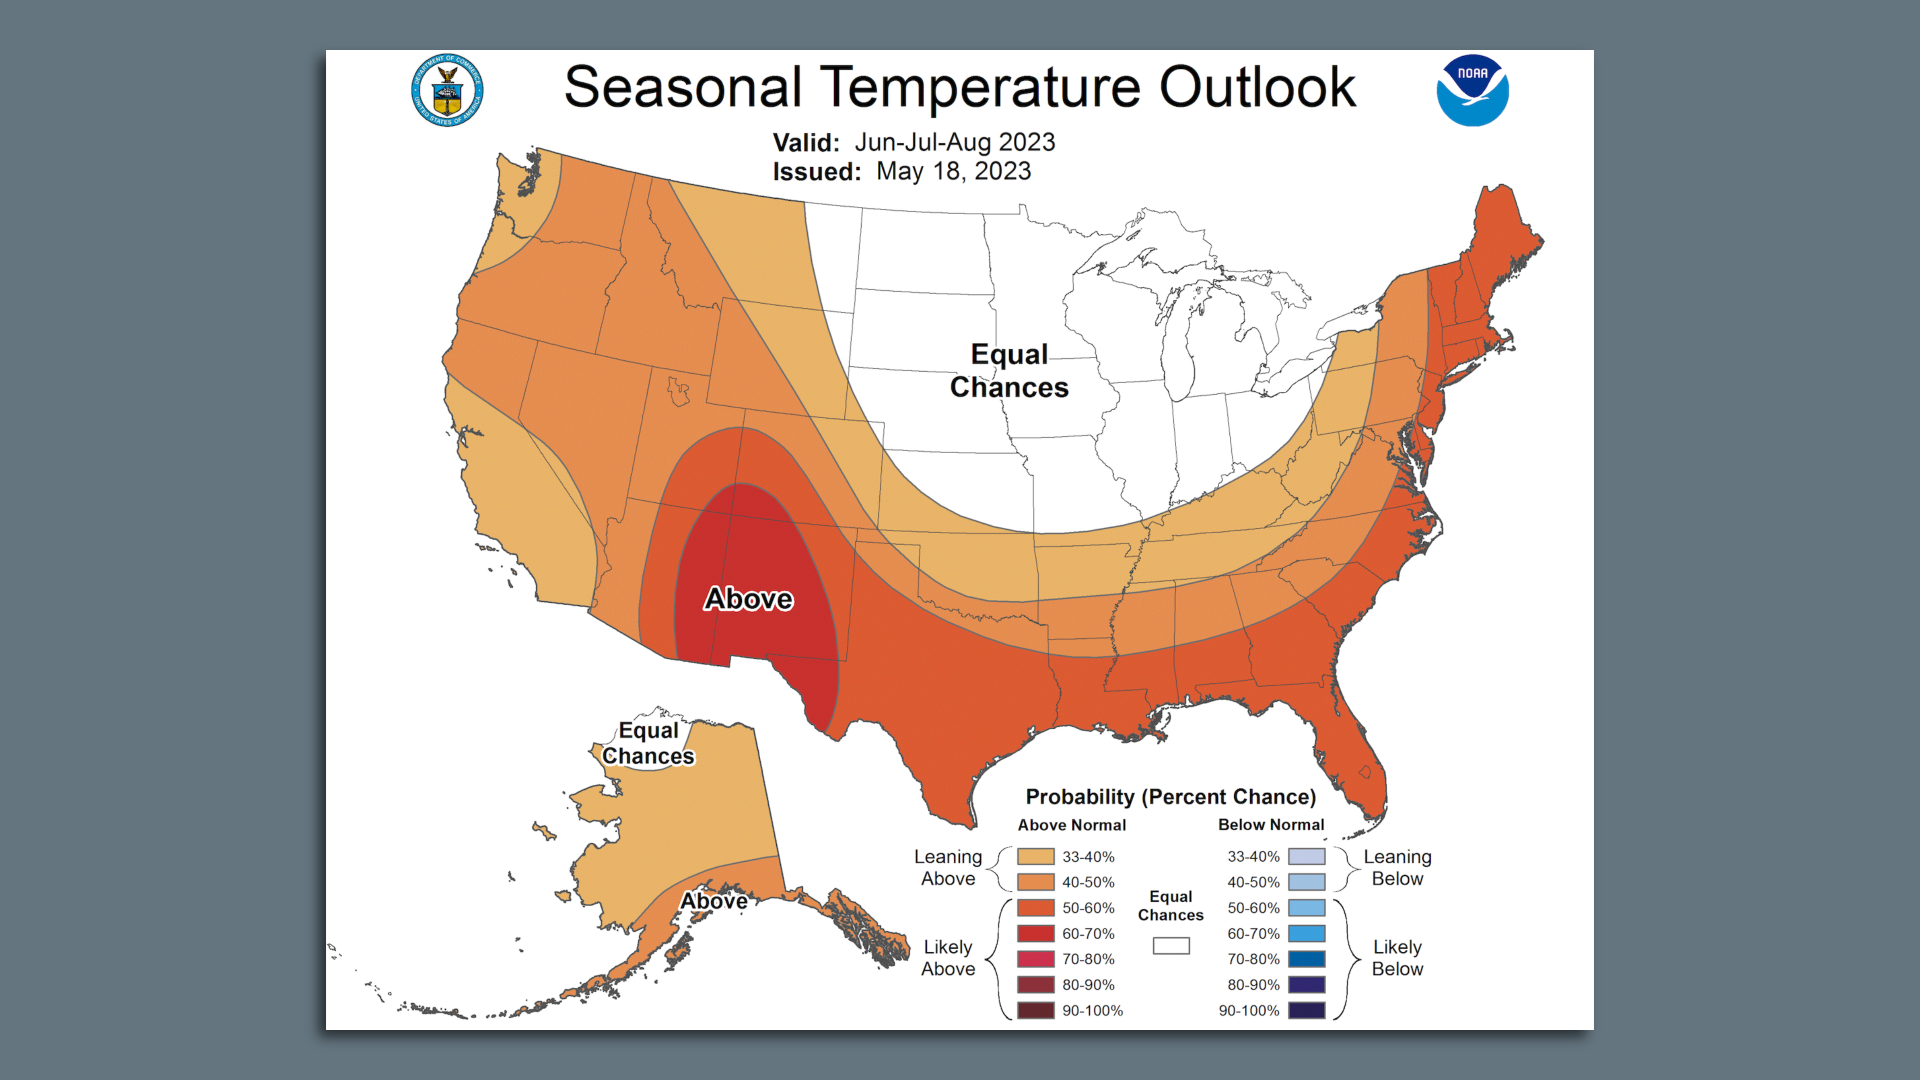 Hot summer ahead for much of the U.S.